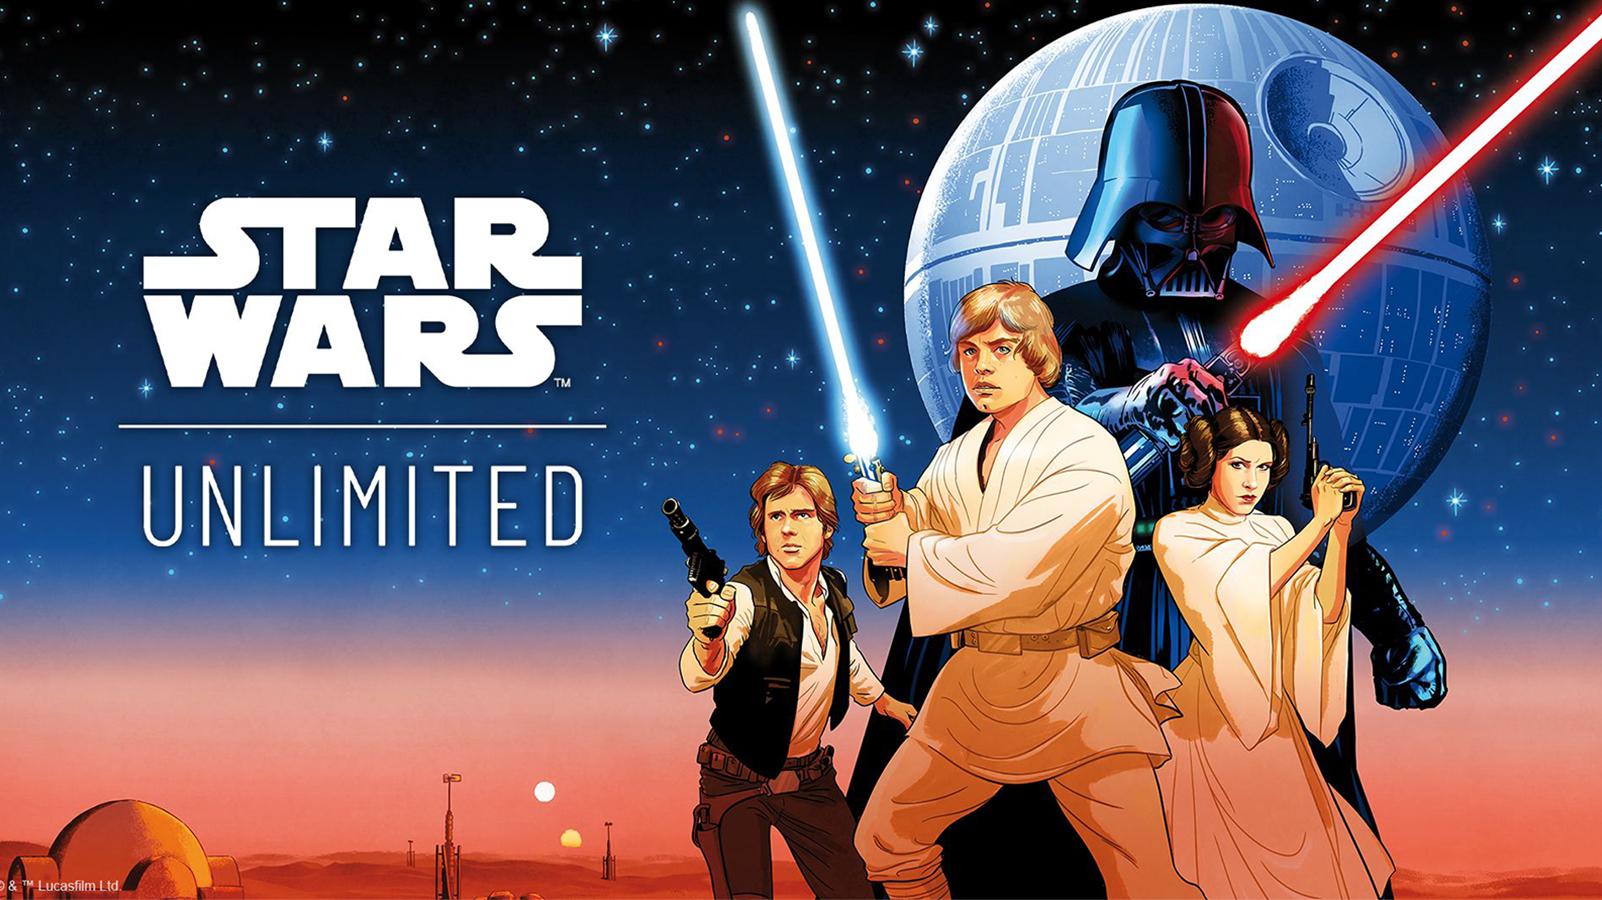 Star Wars Unlimited cover art